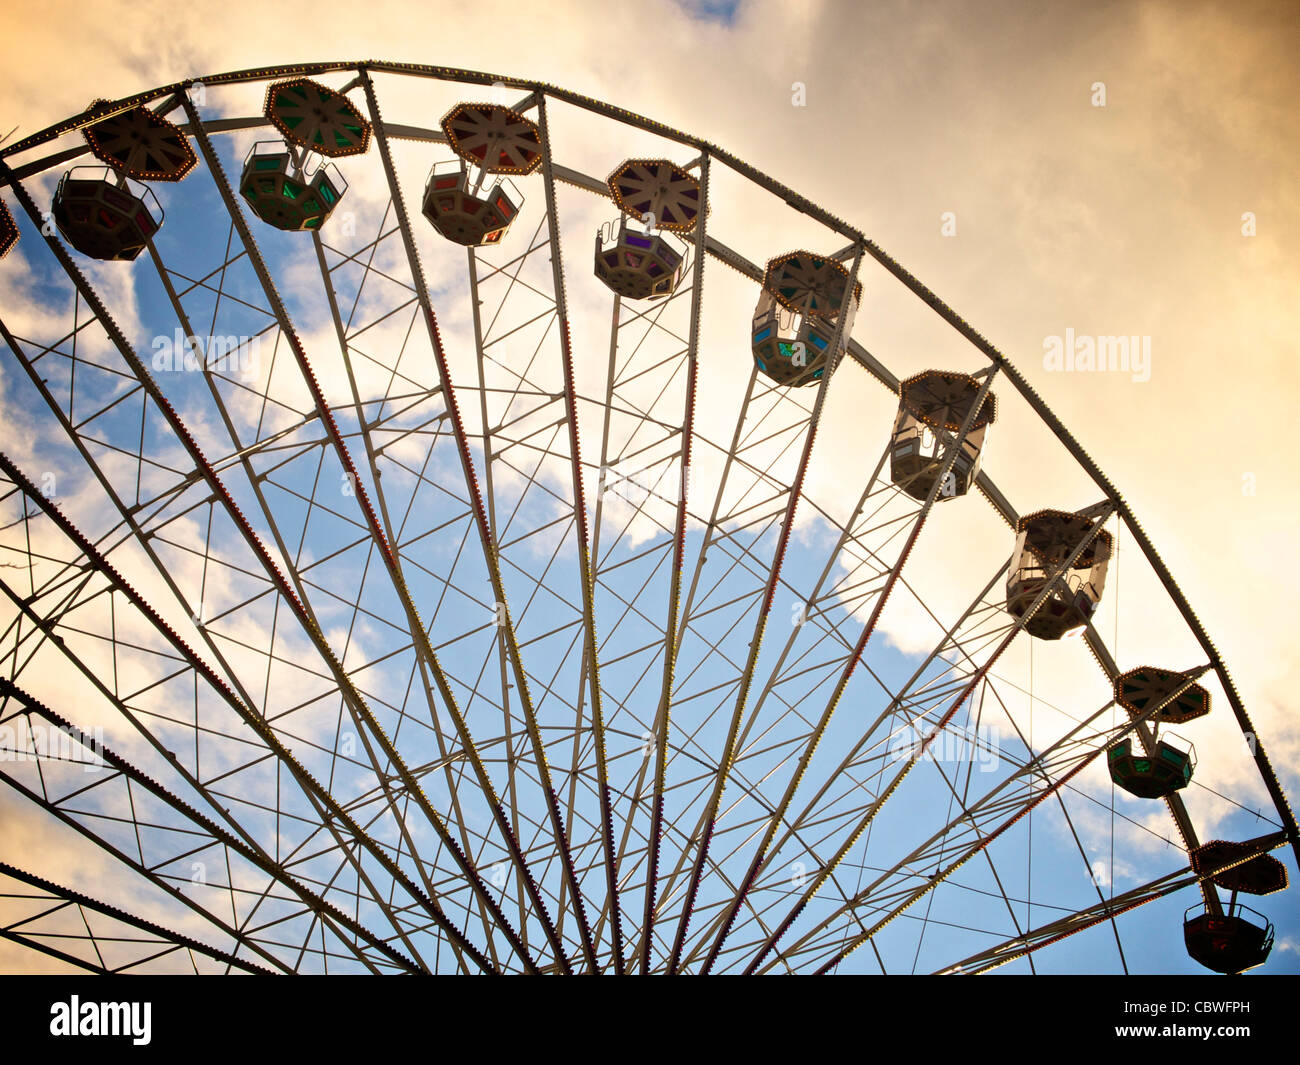 Low angle shot of a Ferris wheel captured at sunset Stock Photo